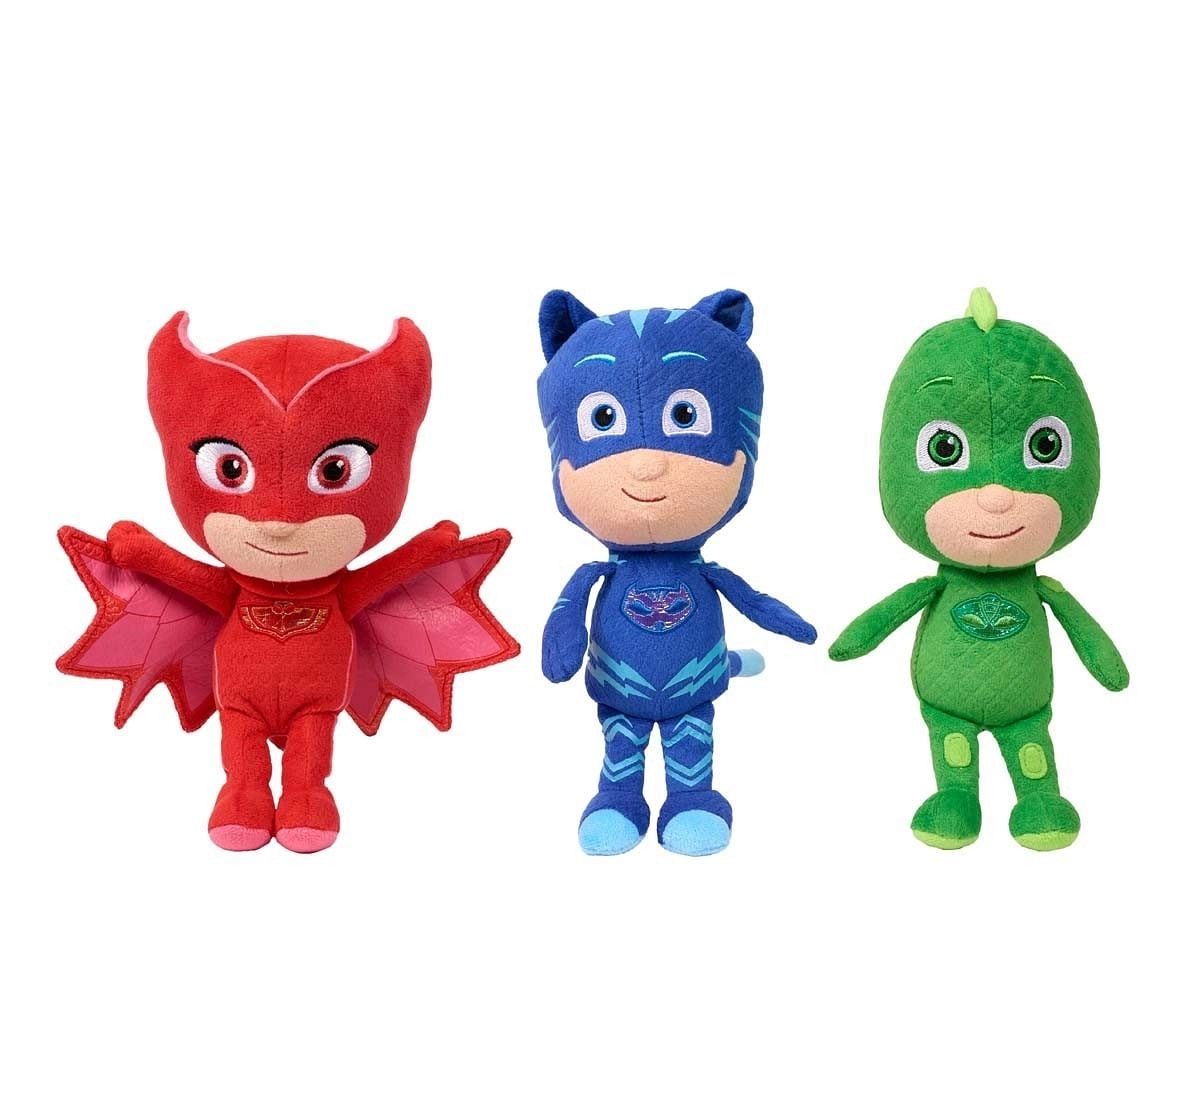 Pj Mask Beans Mini Plush Assorted Character Soft Toys for Kids age 3Y+ - 18.74 Cm 